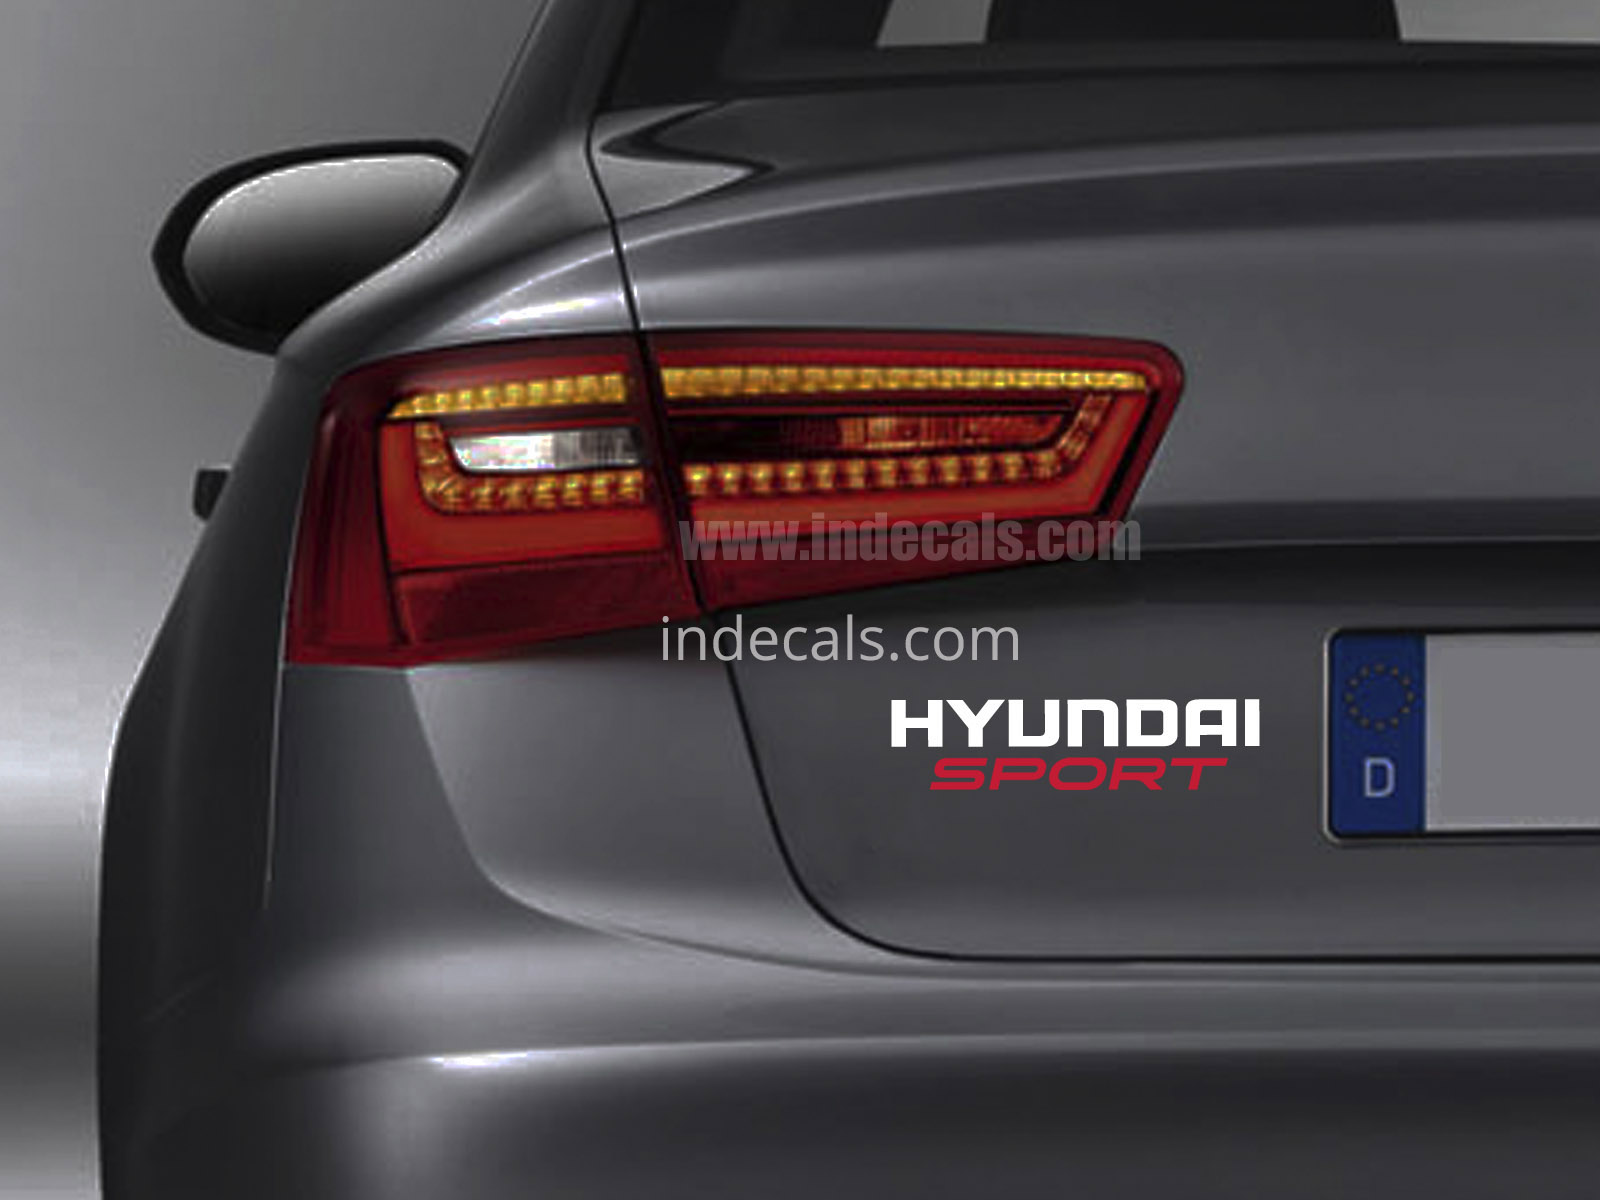 1 x Hyundai Sports Sticker for Trunk - White & Red